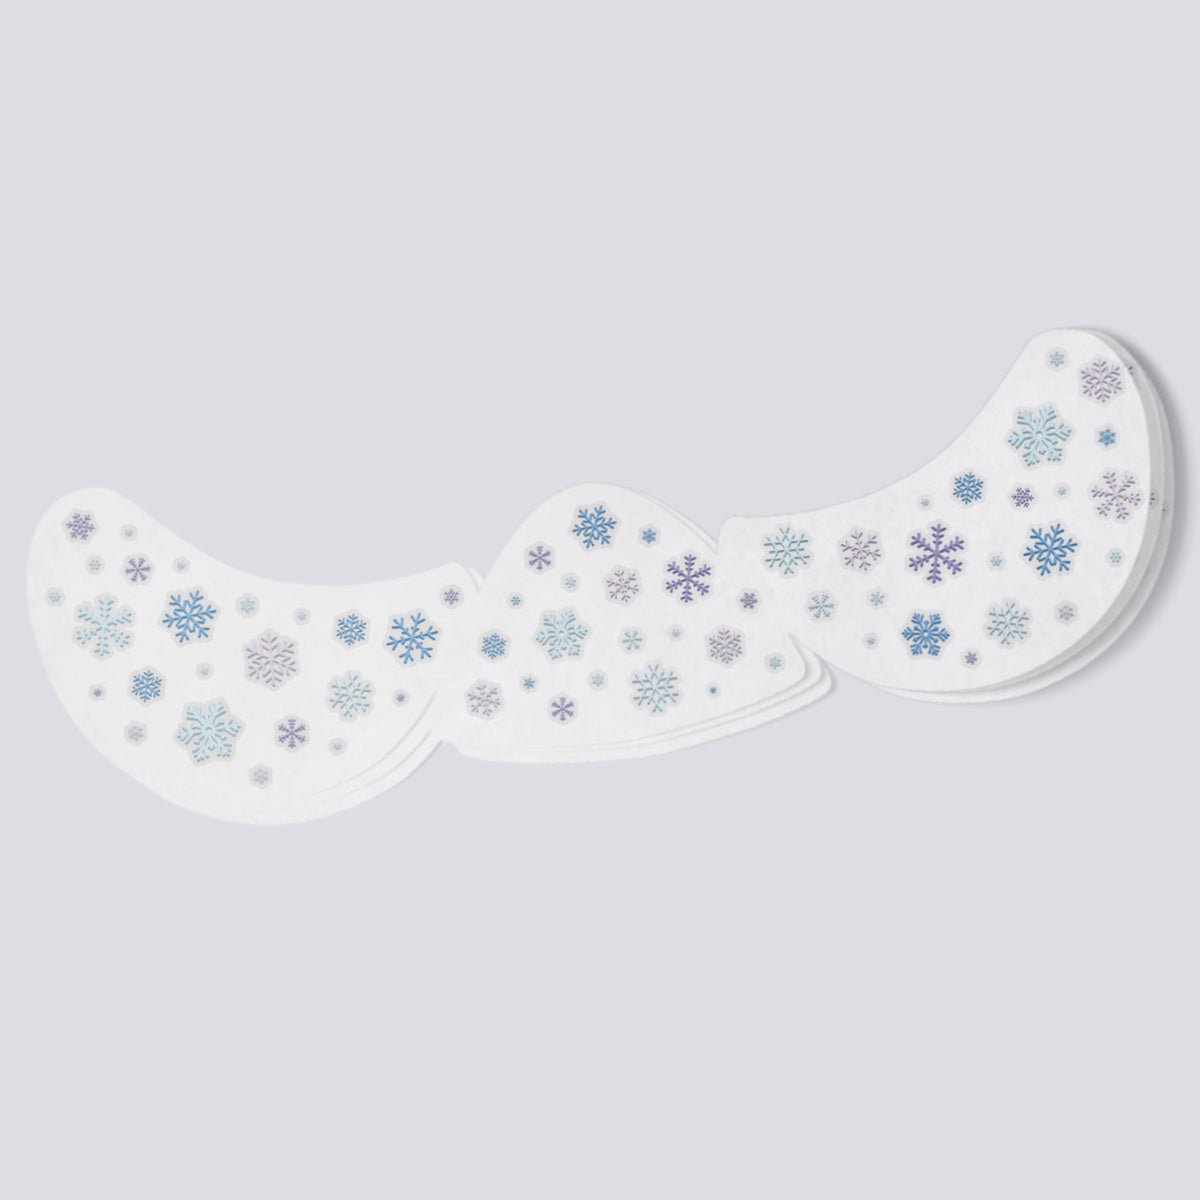 Snowflakes face freckles temporary tattoo